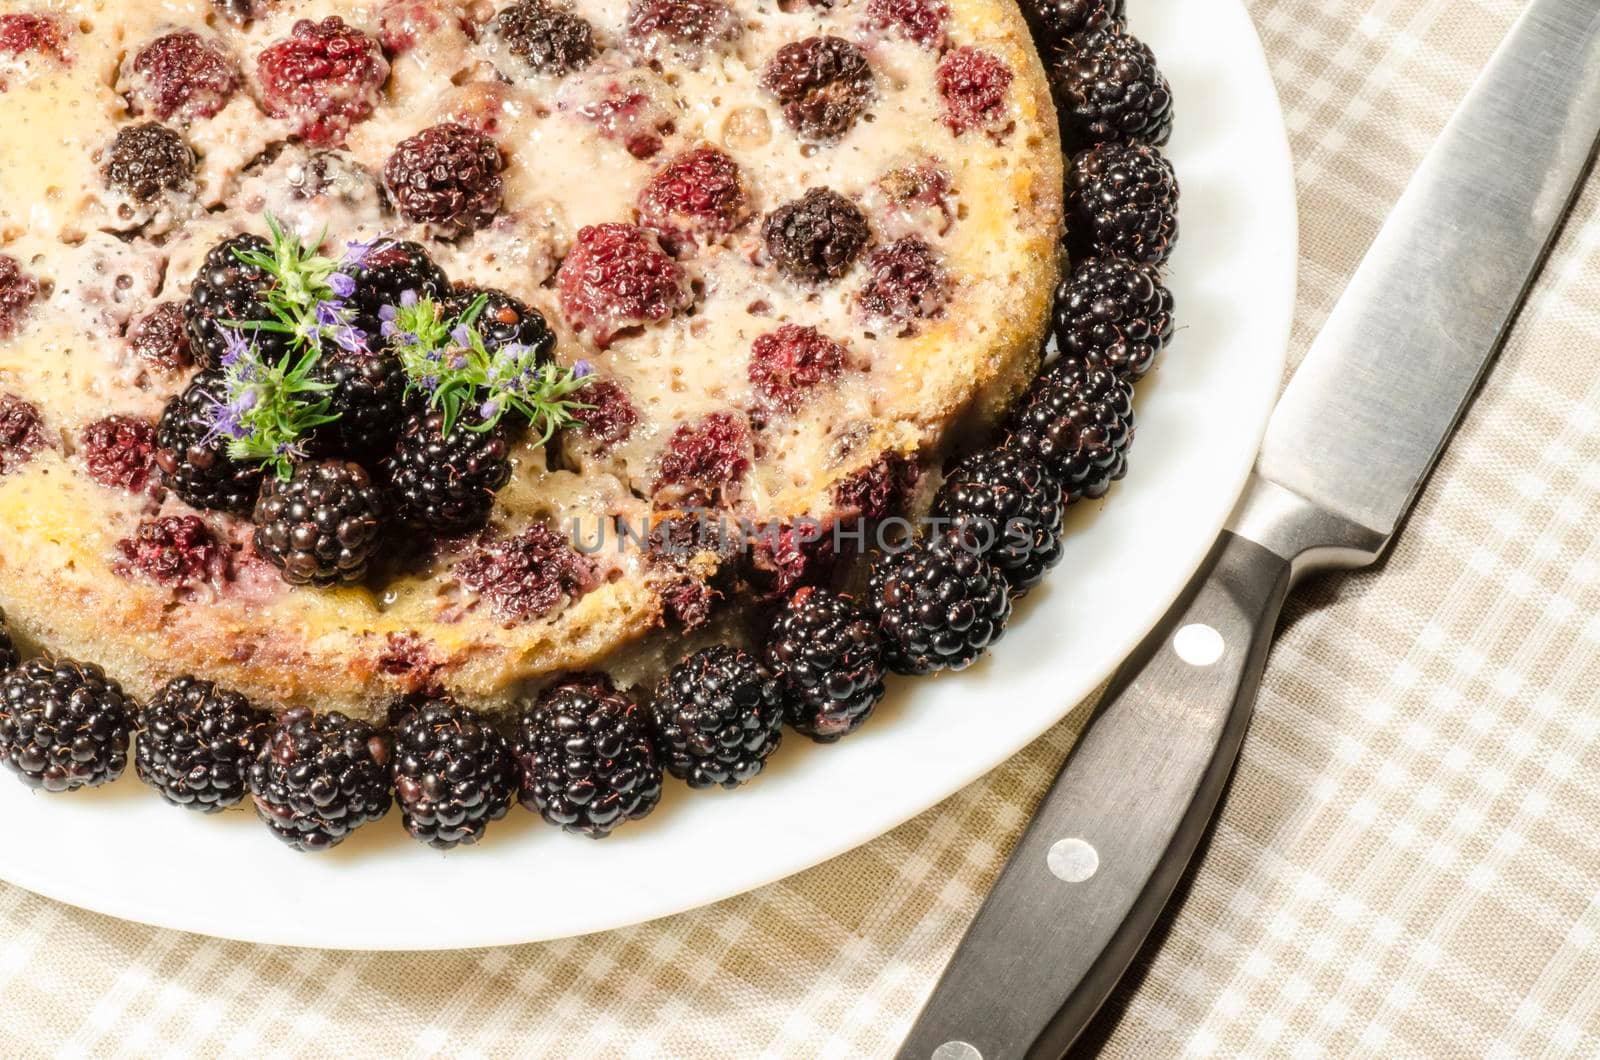 Blackberry Clafoutis on plate with fresh berries. From series "Summer desserts"